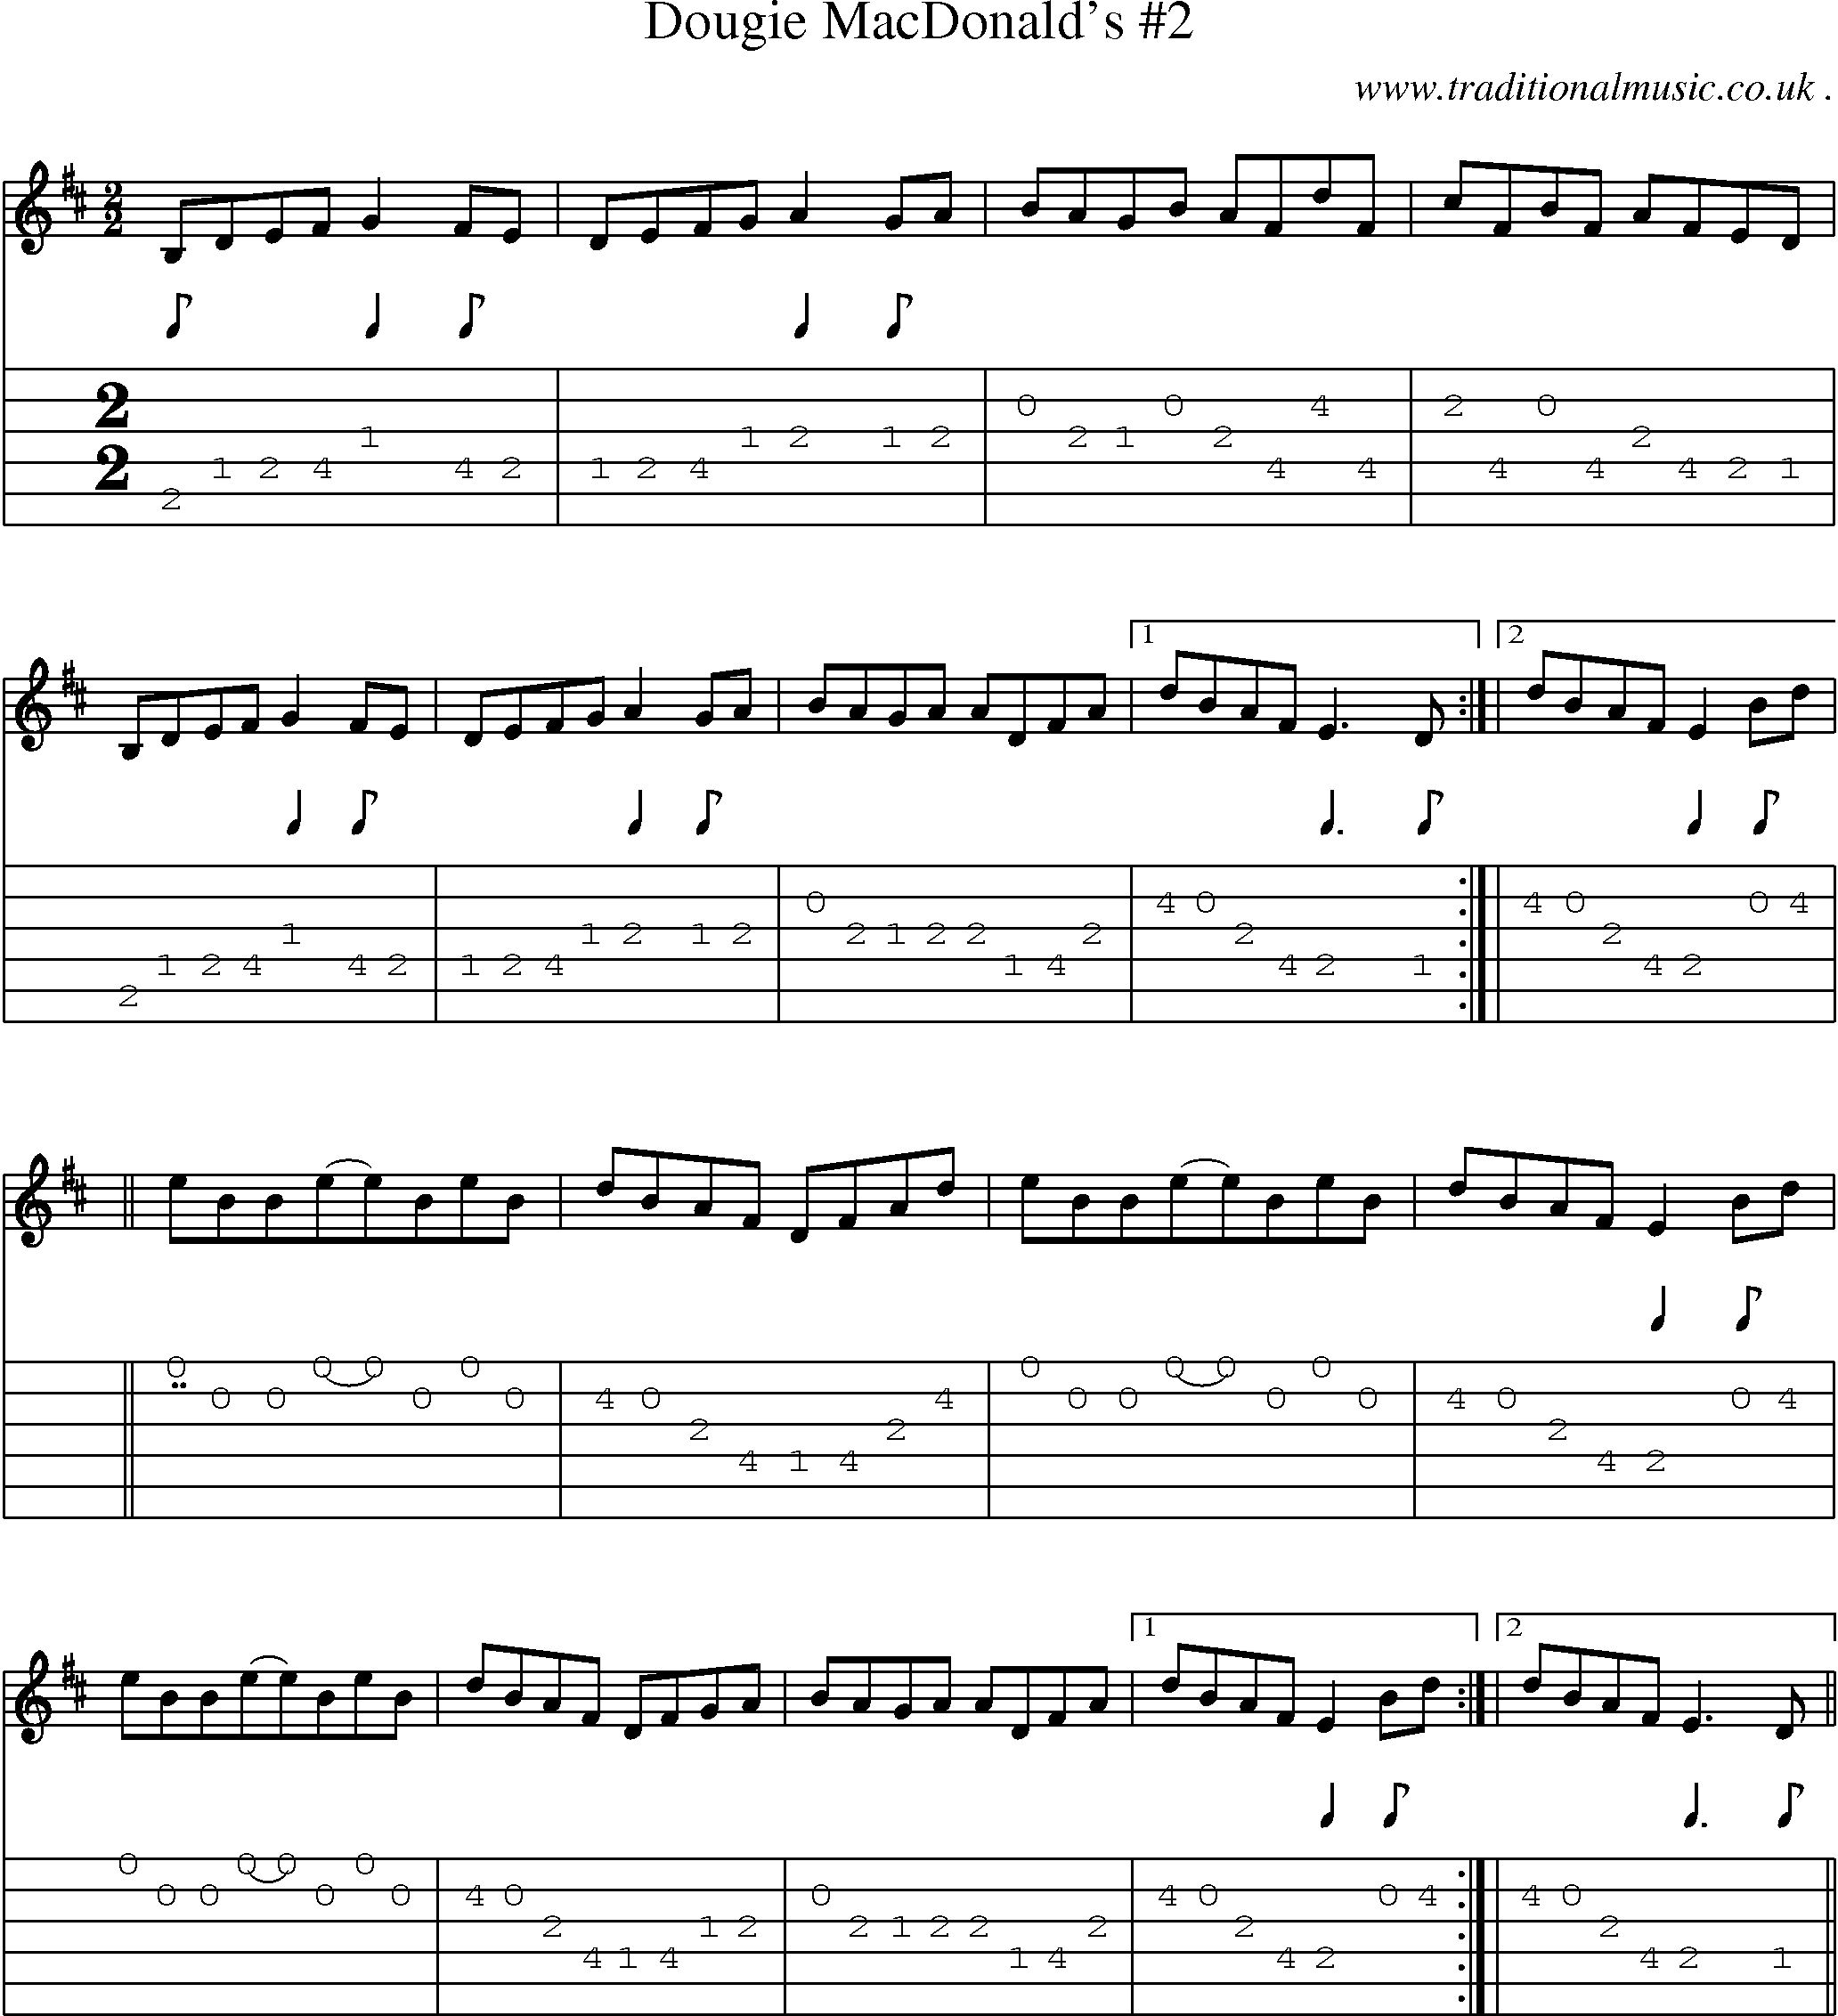 Sheet-Music and Guitar Tabs for Dougie Macdonalds 2